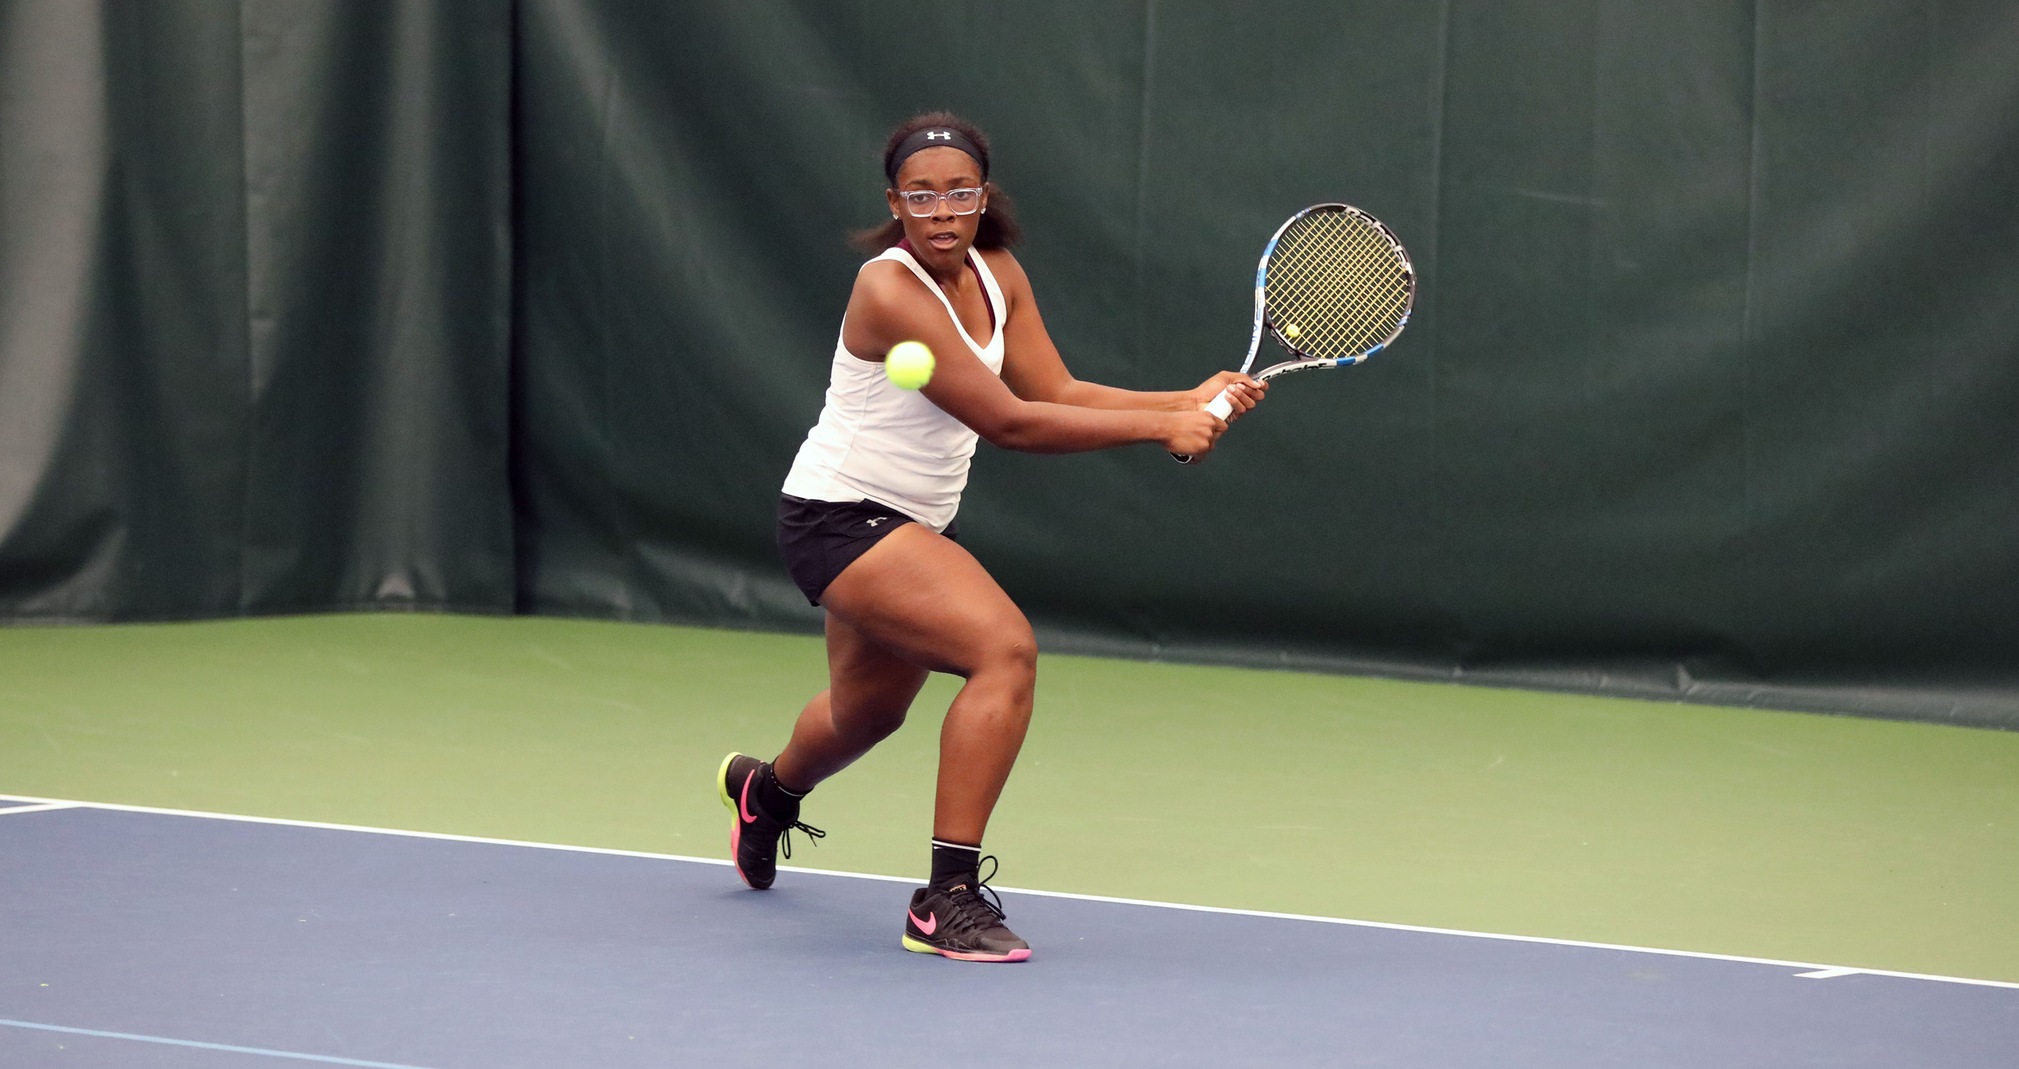 Michelle Spicer won contests against UW-River Falls at No. 4 singles and No. 1 doubles.